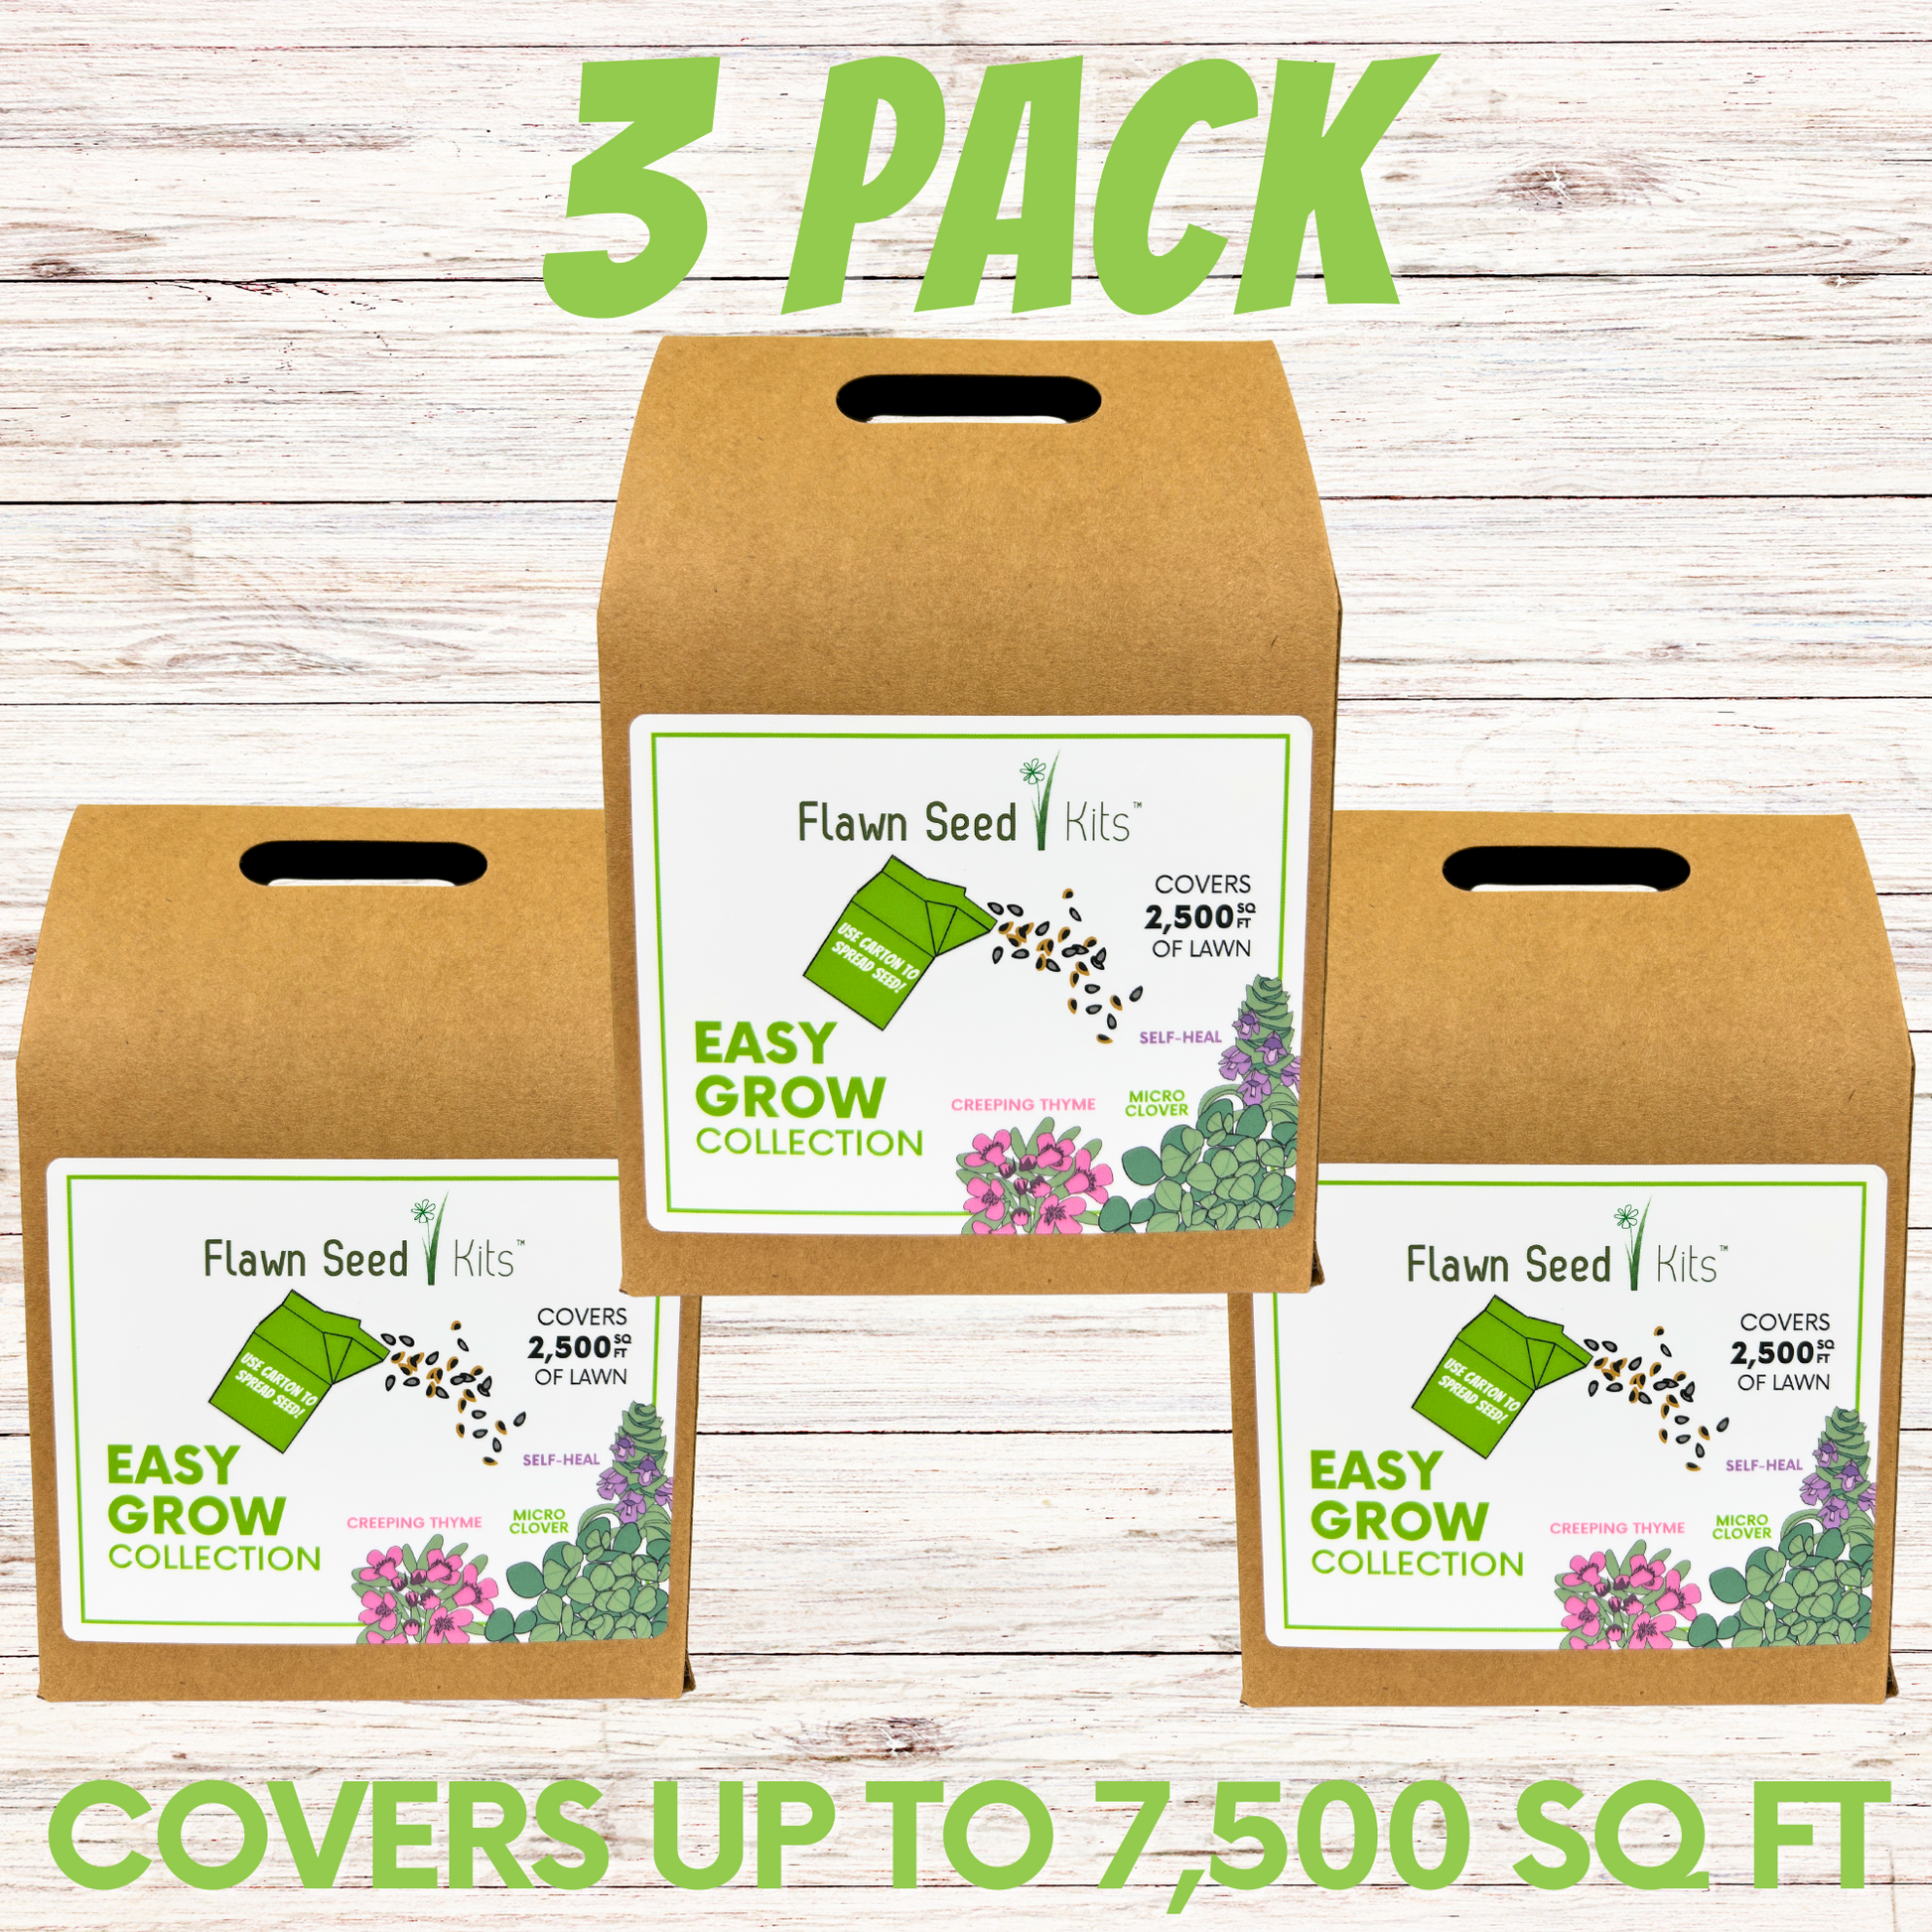 Micro Bee Lawn Flowering Pollinator Seed Kit, Micro Clover, Self-Heal, Creeping Thyme, Easy Spread Container 3 Pack Covers 7,500 square feet